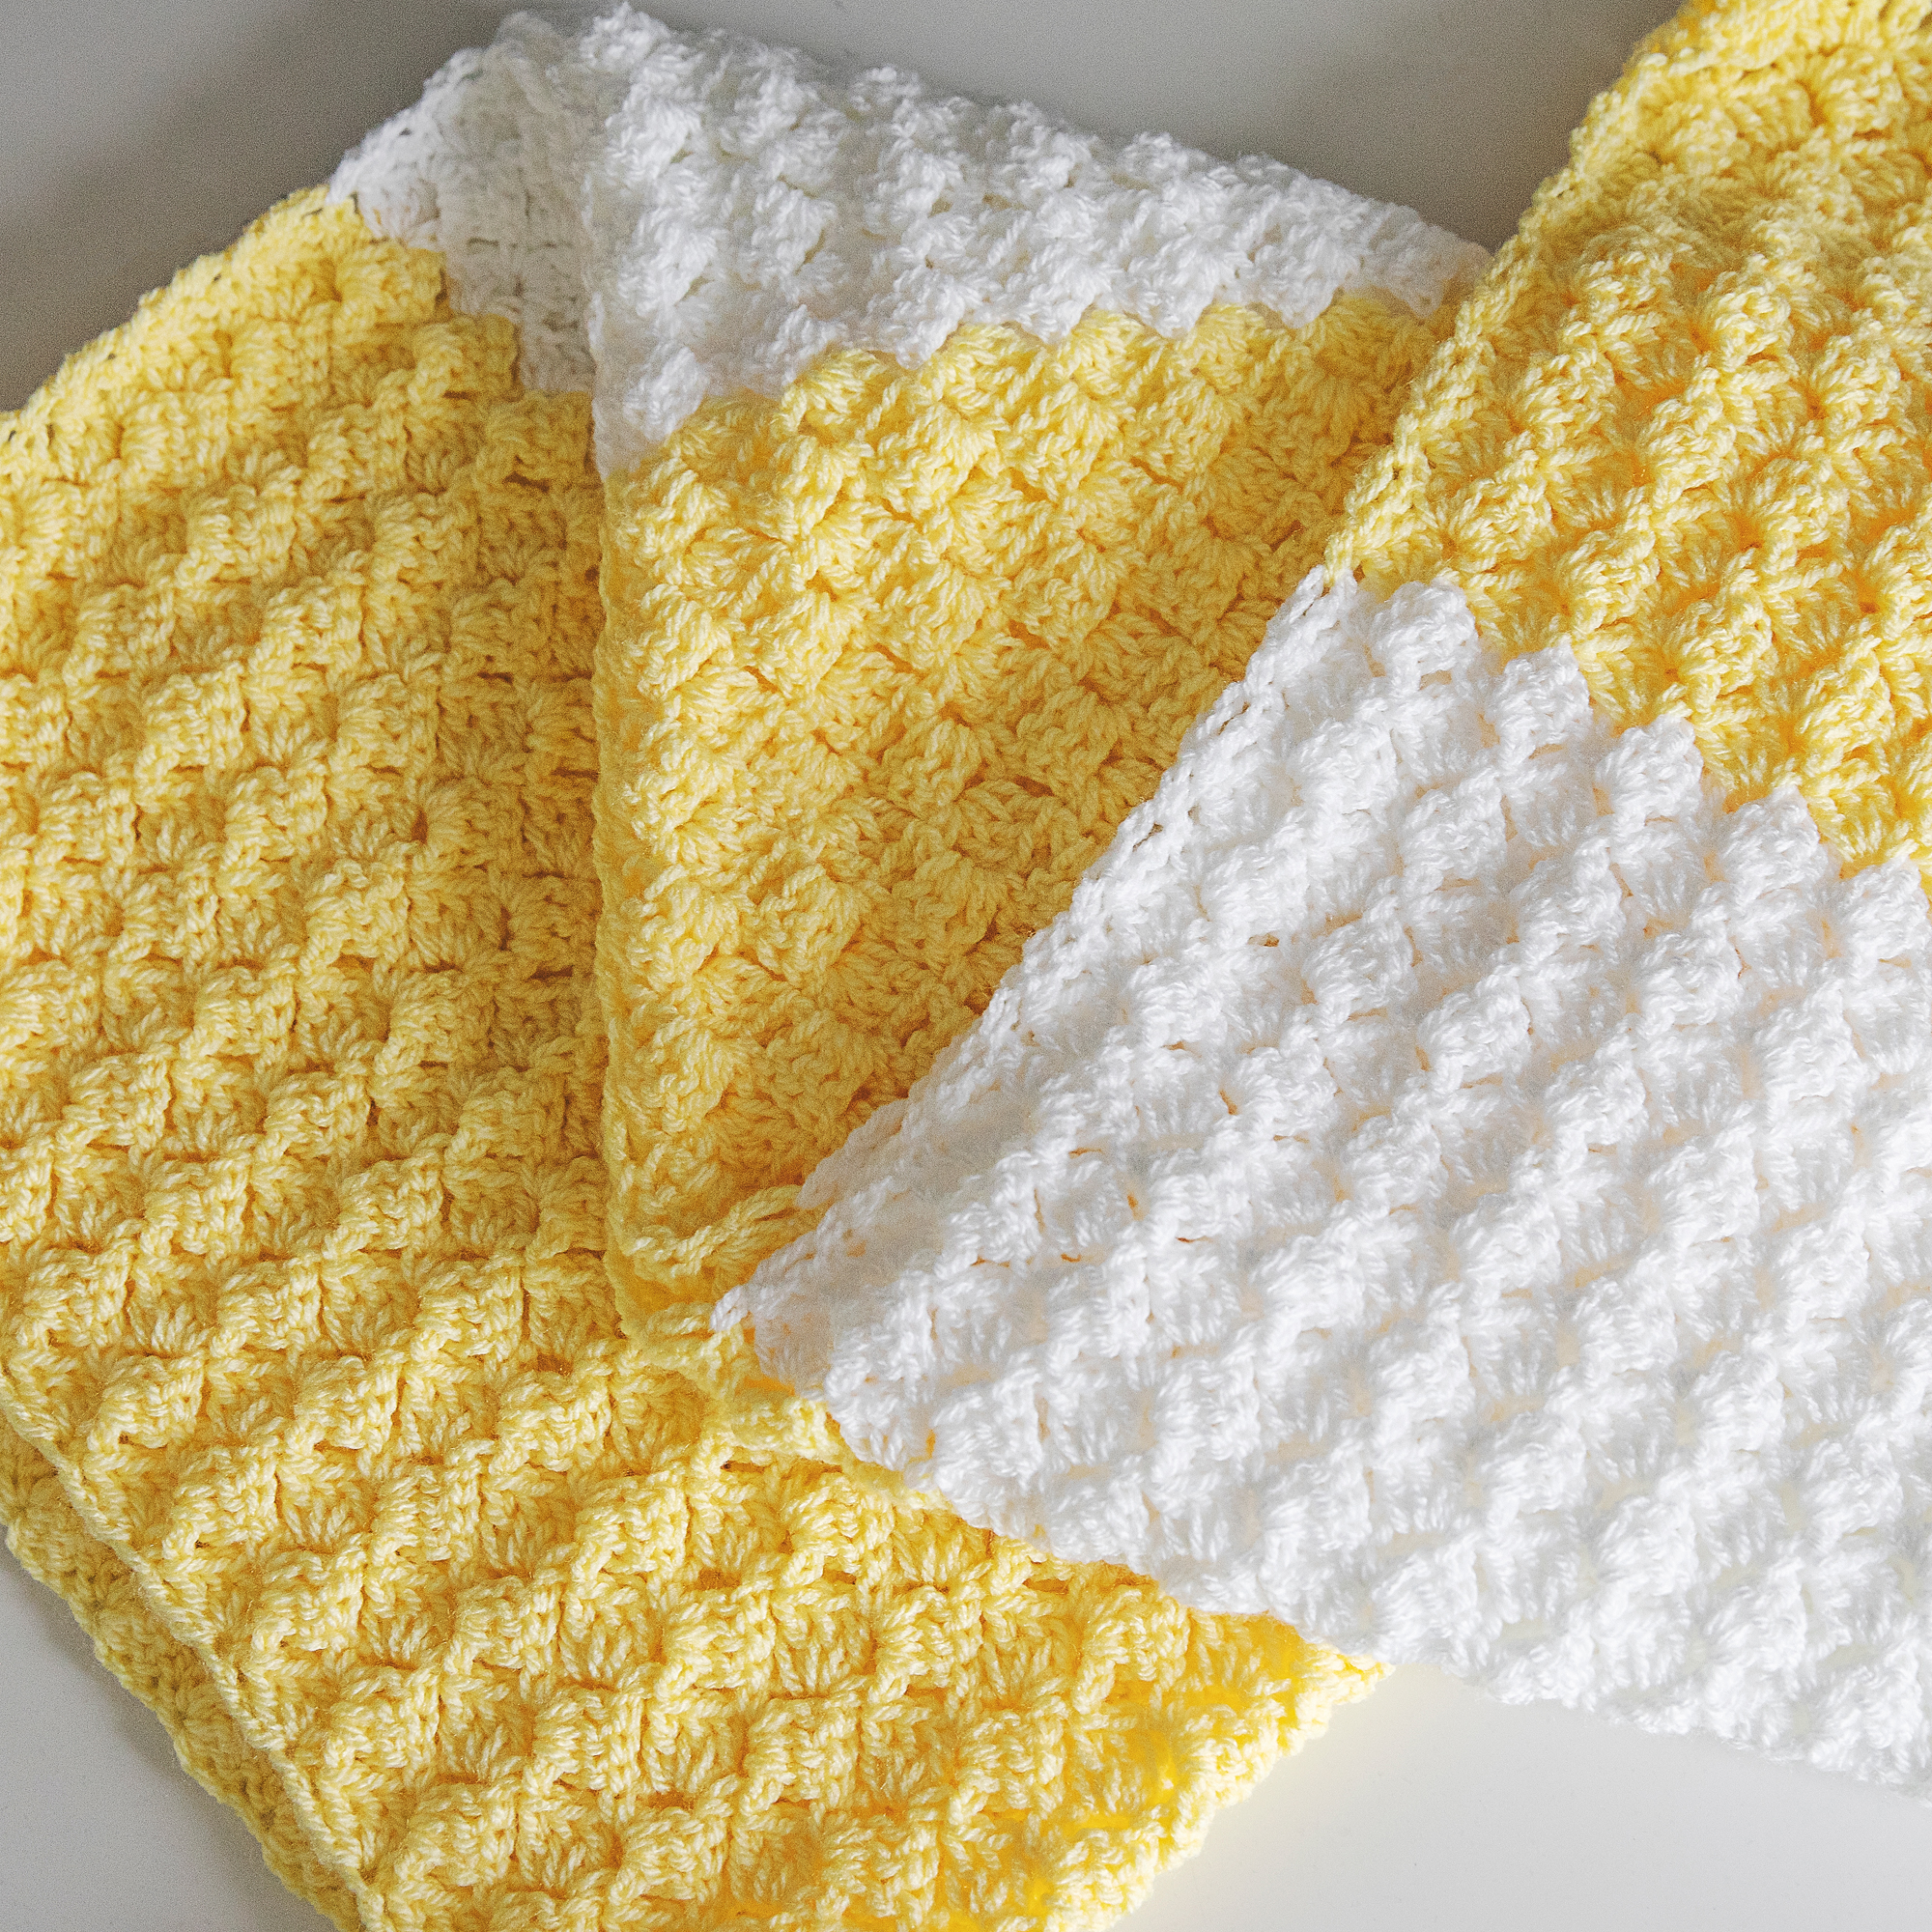 How to Crochet a Baby Blanket Step by Step - My Crochet Space